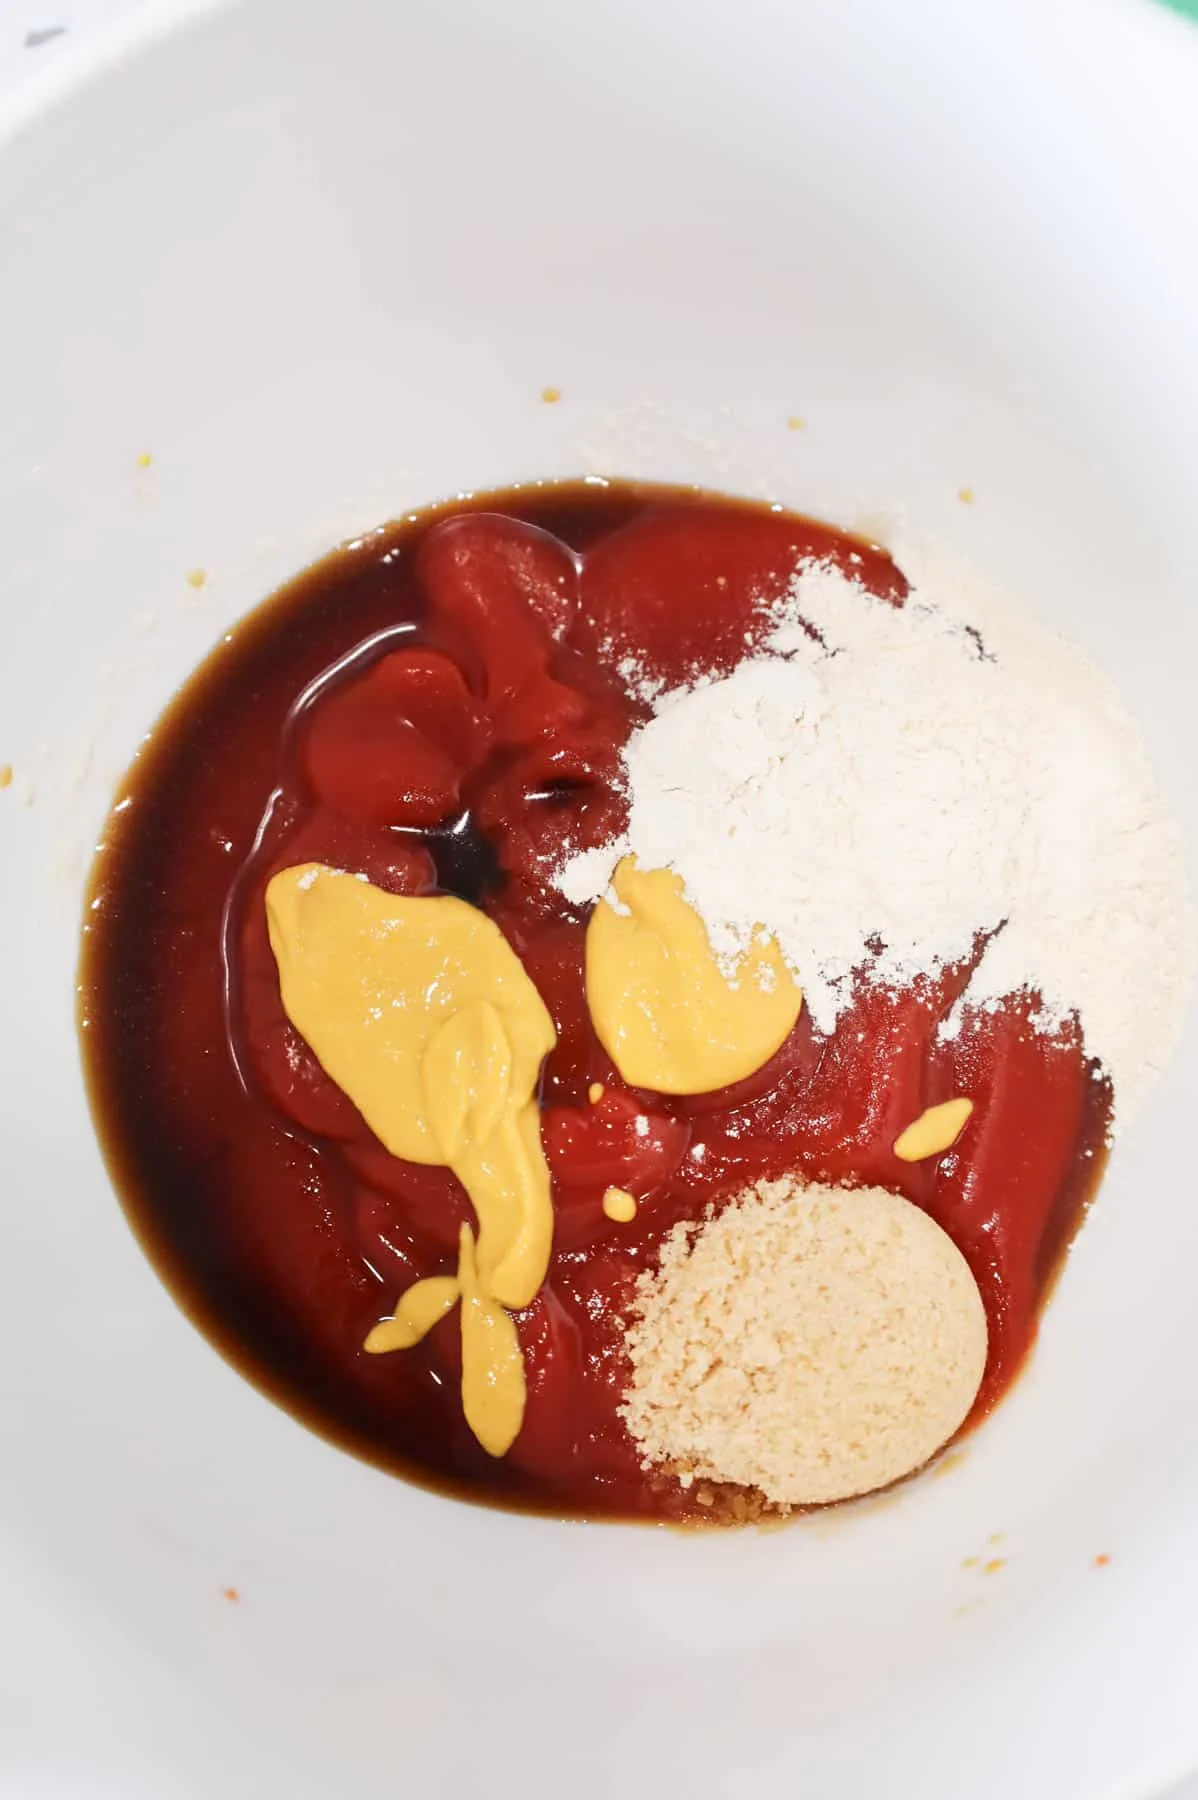 brown sugar, onion powder, mustard, Worcestershire sauce and ketchup in a bowl